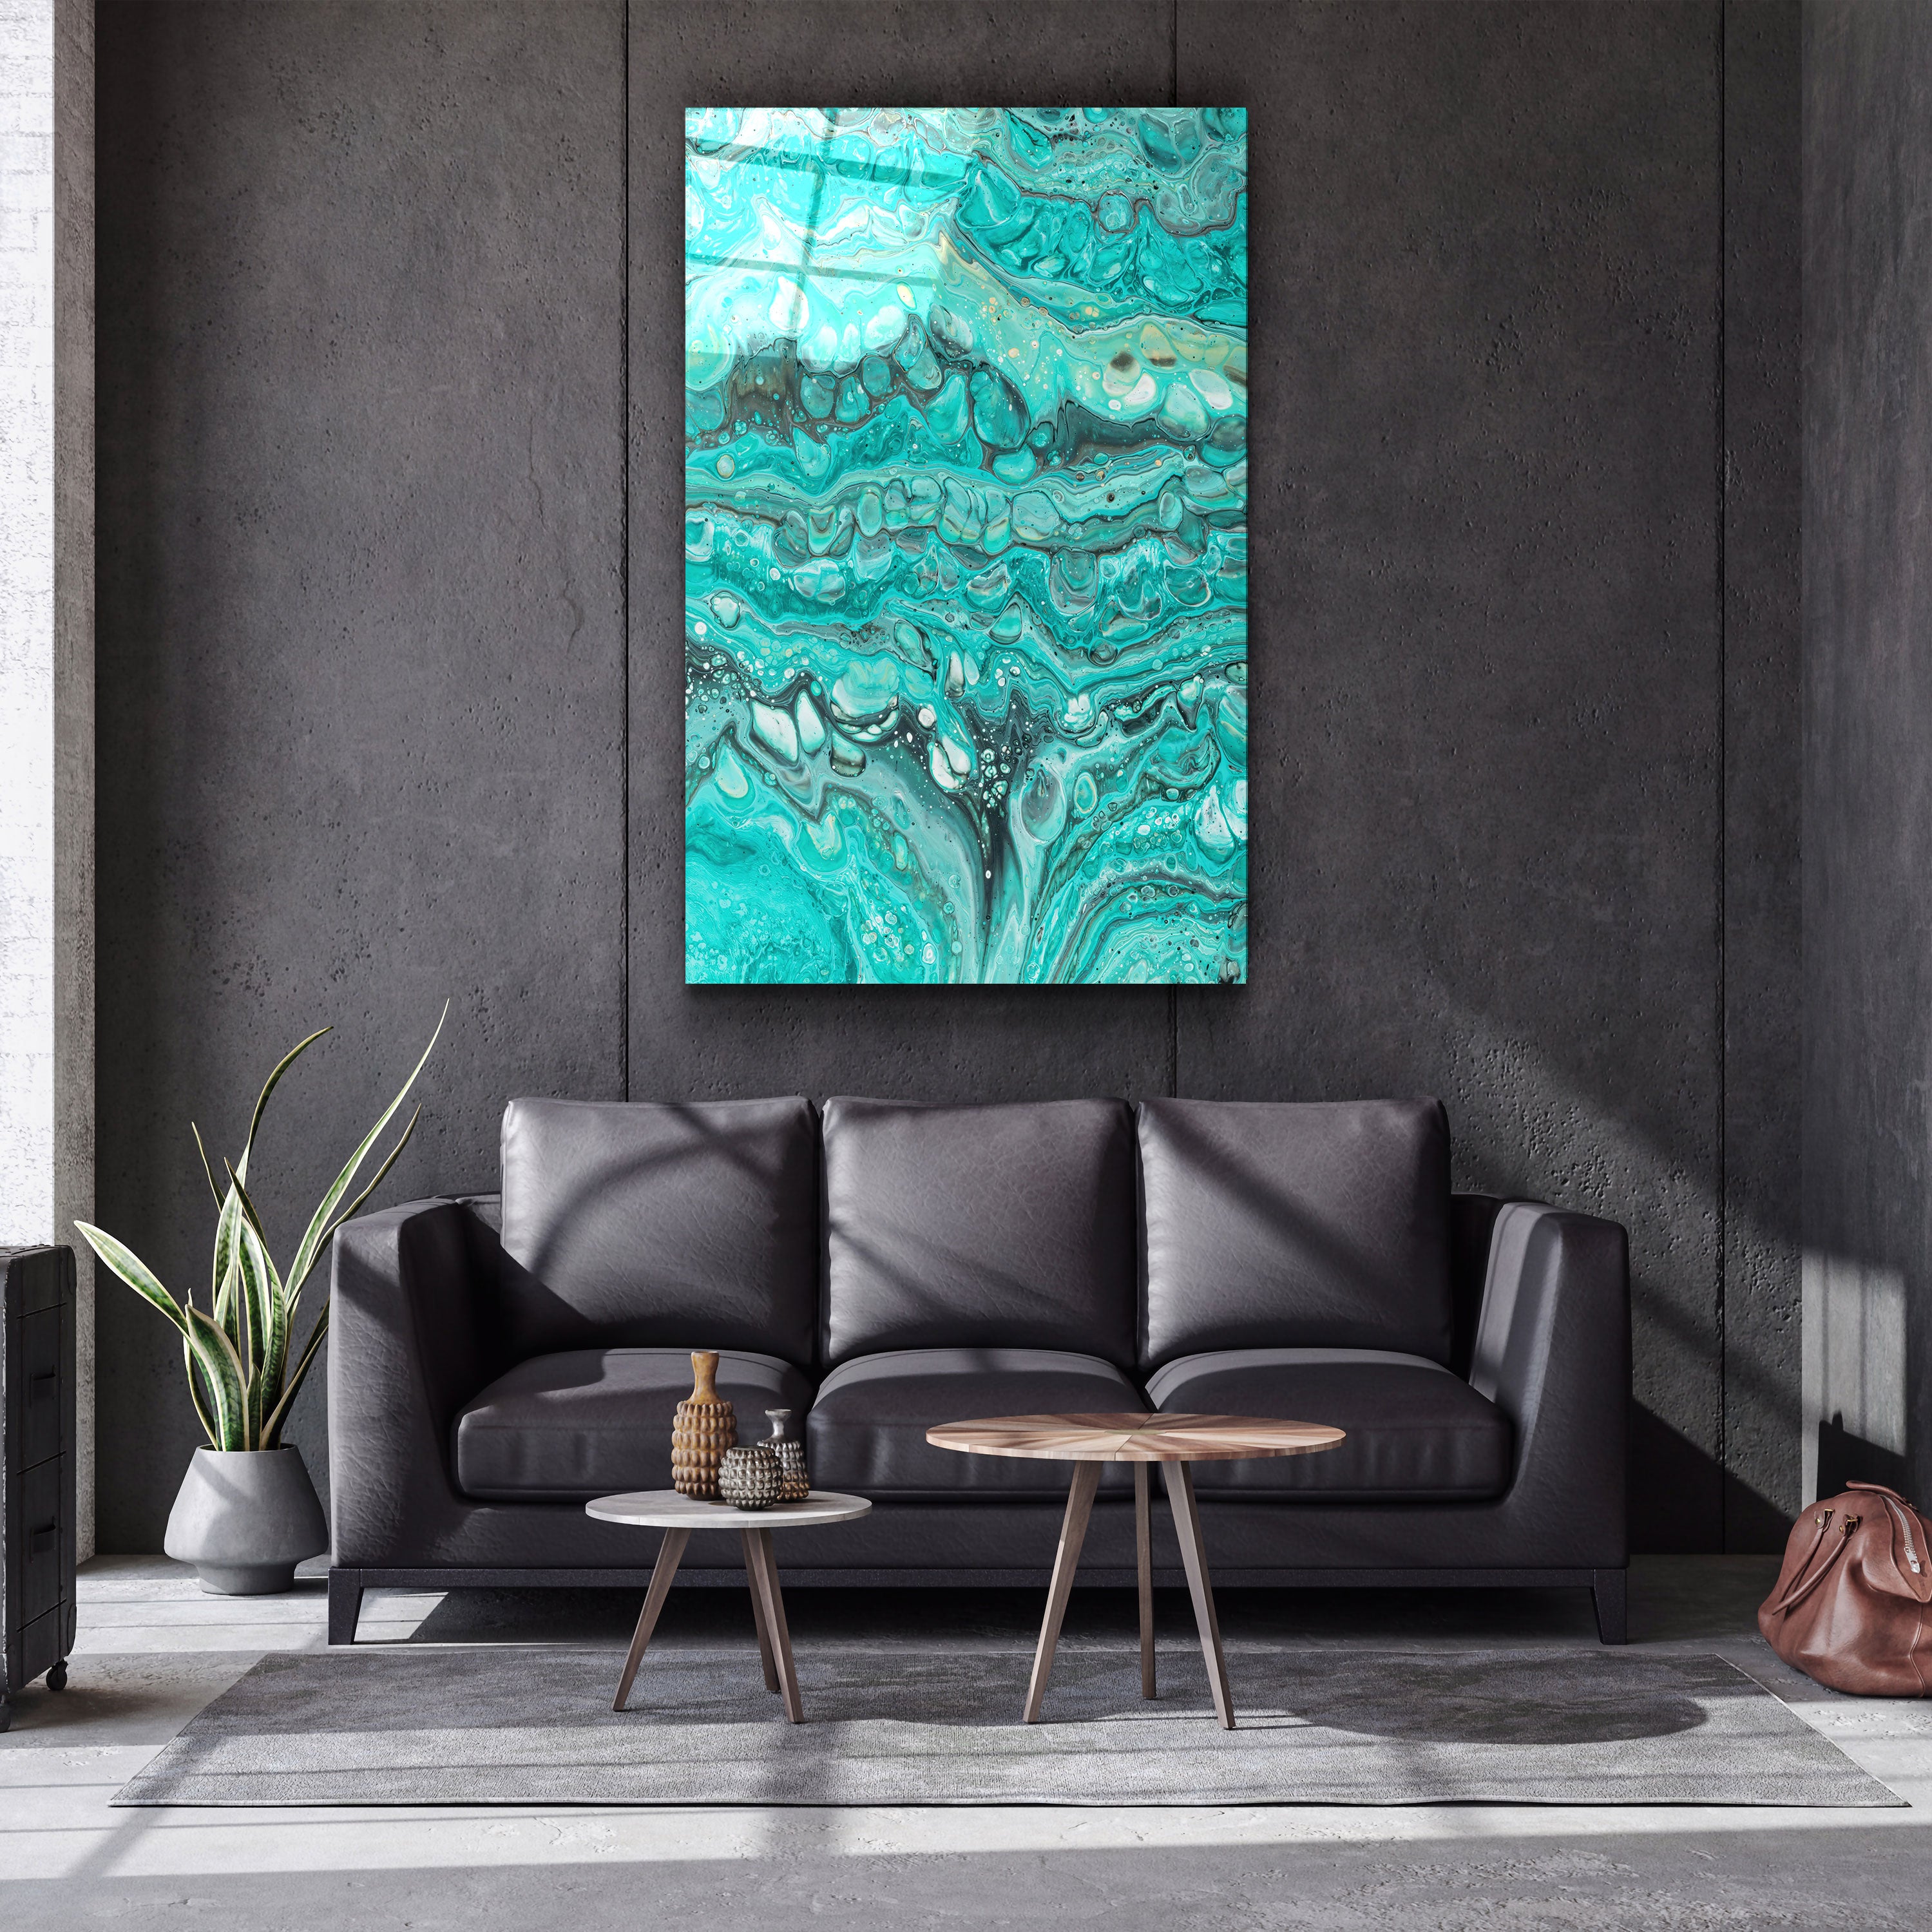 ・"Abstract Turquoise Ink Drops"・Designer's Collection Glass Wall Art